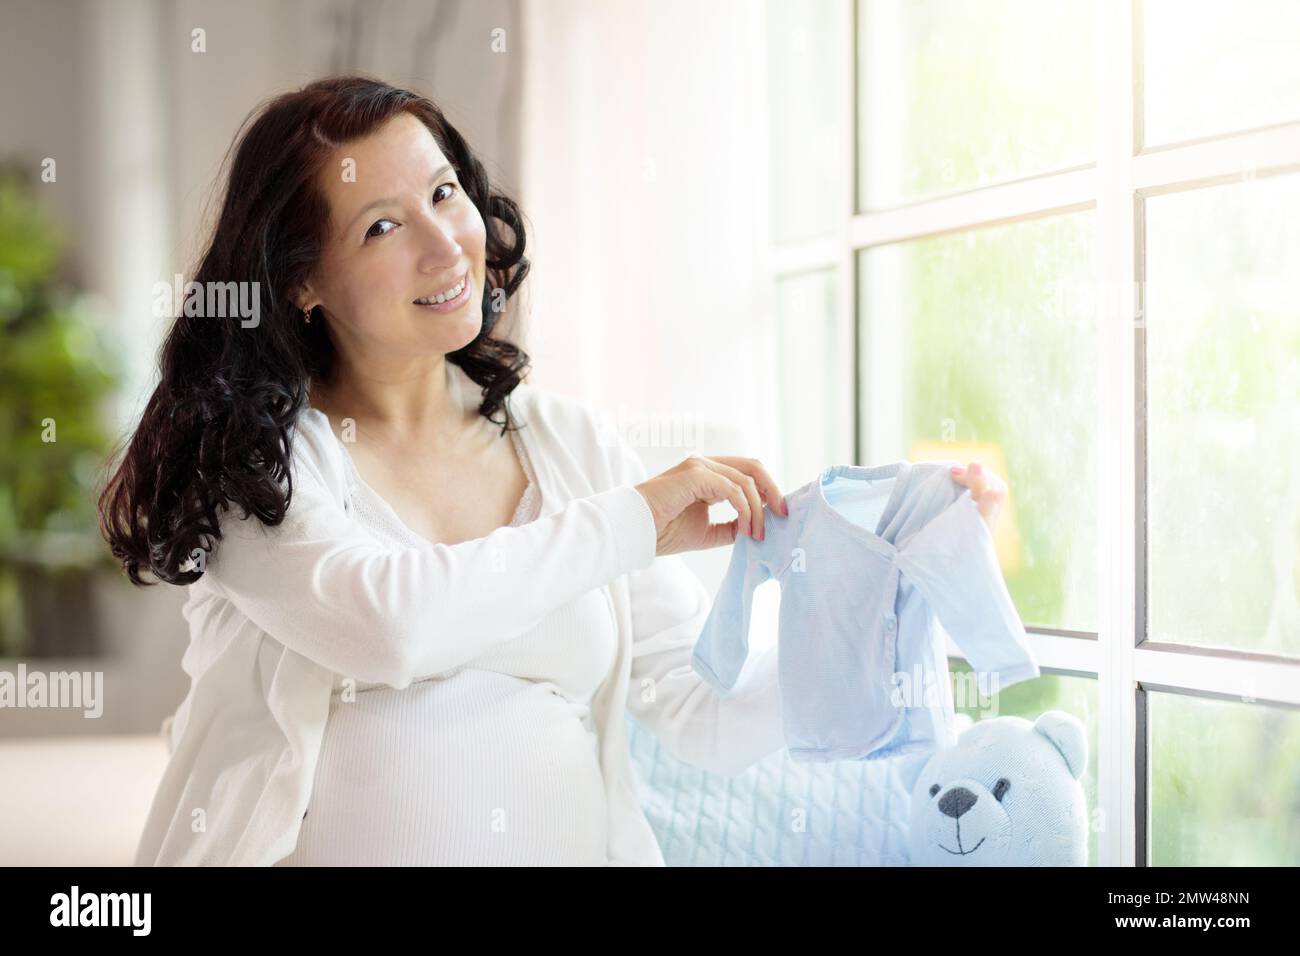 Pregnant woman at home. Asian expecting mother in white bedroom. Healthy pregnancy. Young female looking at baby sonogram preparing for birth. Materni Stock Photo